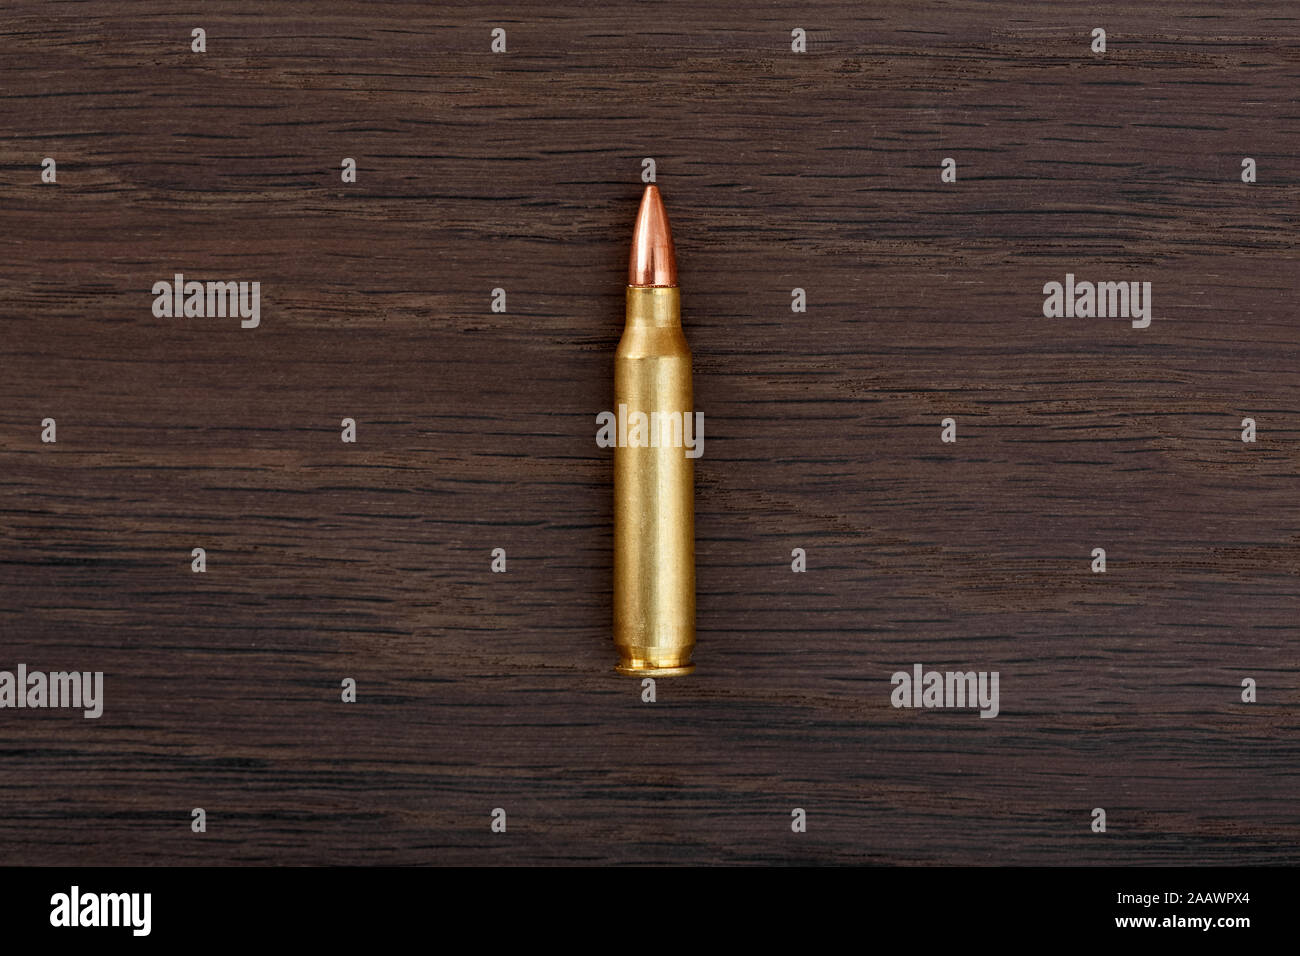 Single rifle bullet on old wooden table close-up. Stock Photo